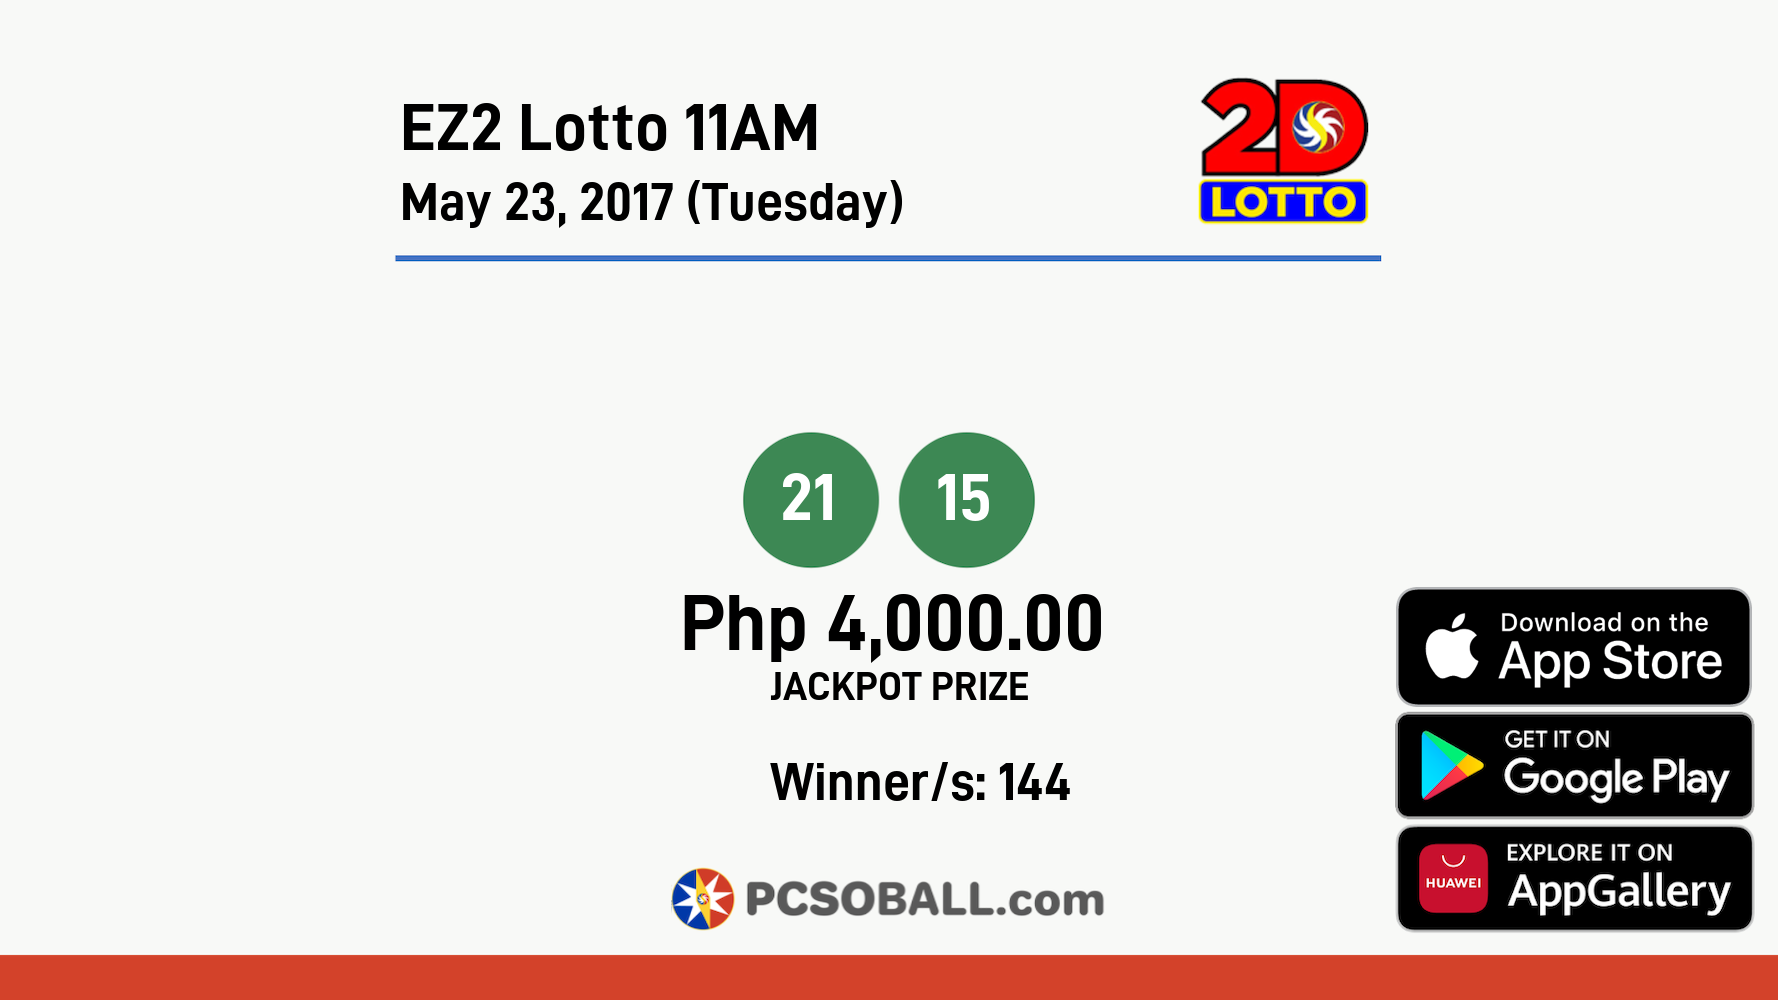 EZ2 Lotto 11AM May 23, 2017 (Tuesday) Result